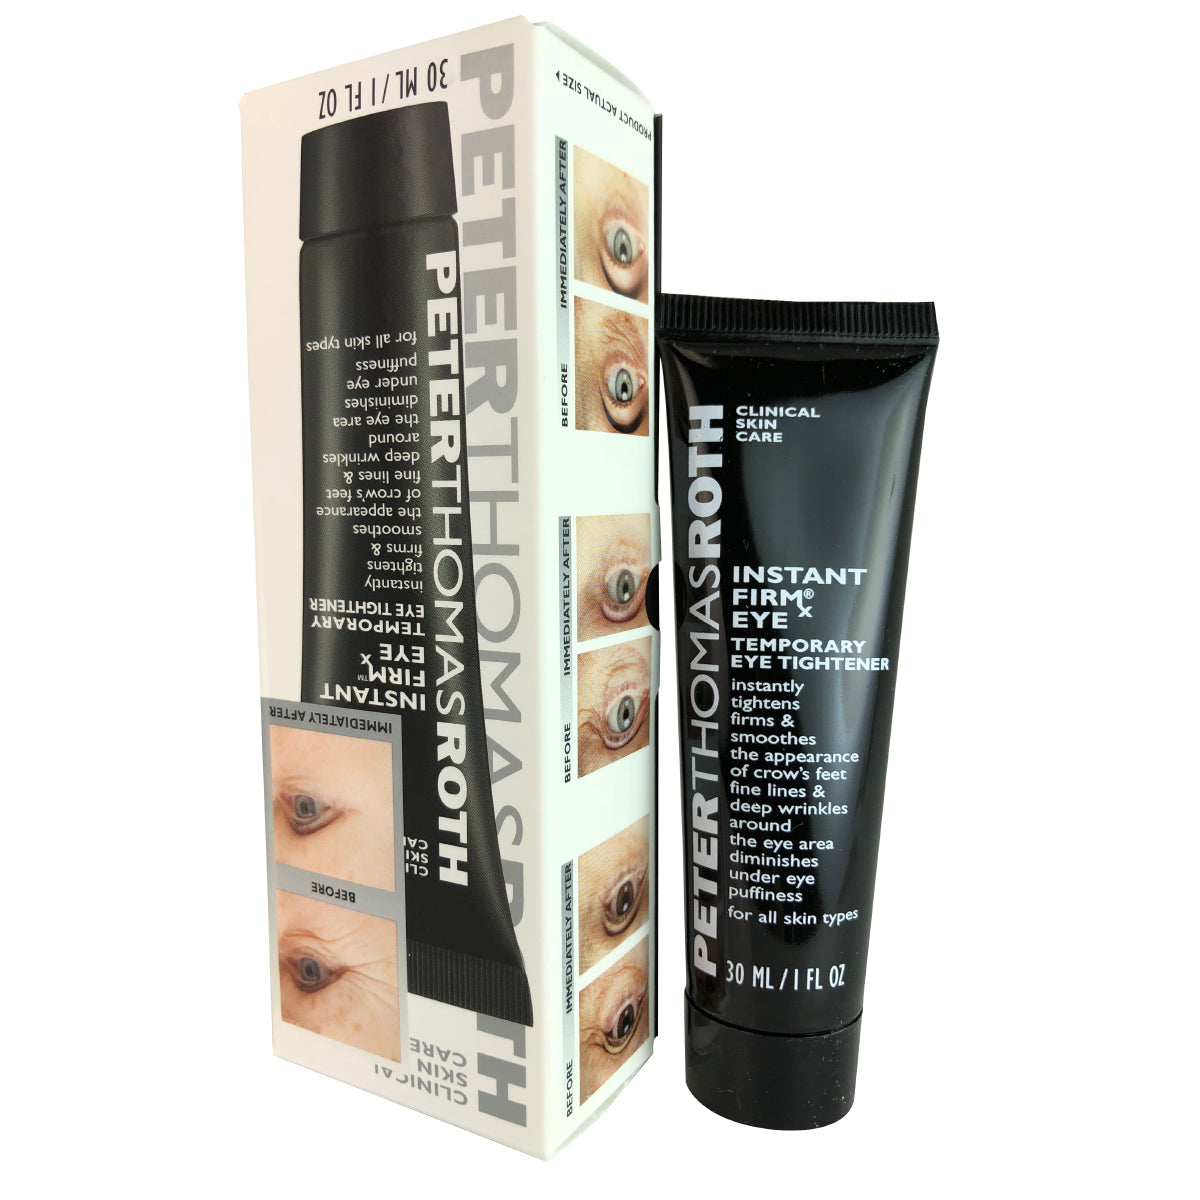 Peter Thomas Roth Instant FirmX Eye Temporary Eye Tightner 1 oz Firms + Smoothes